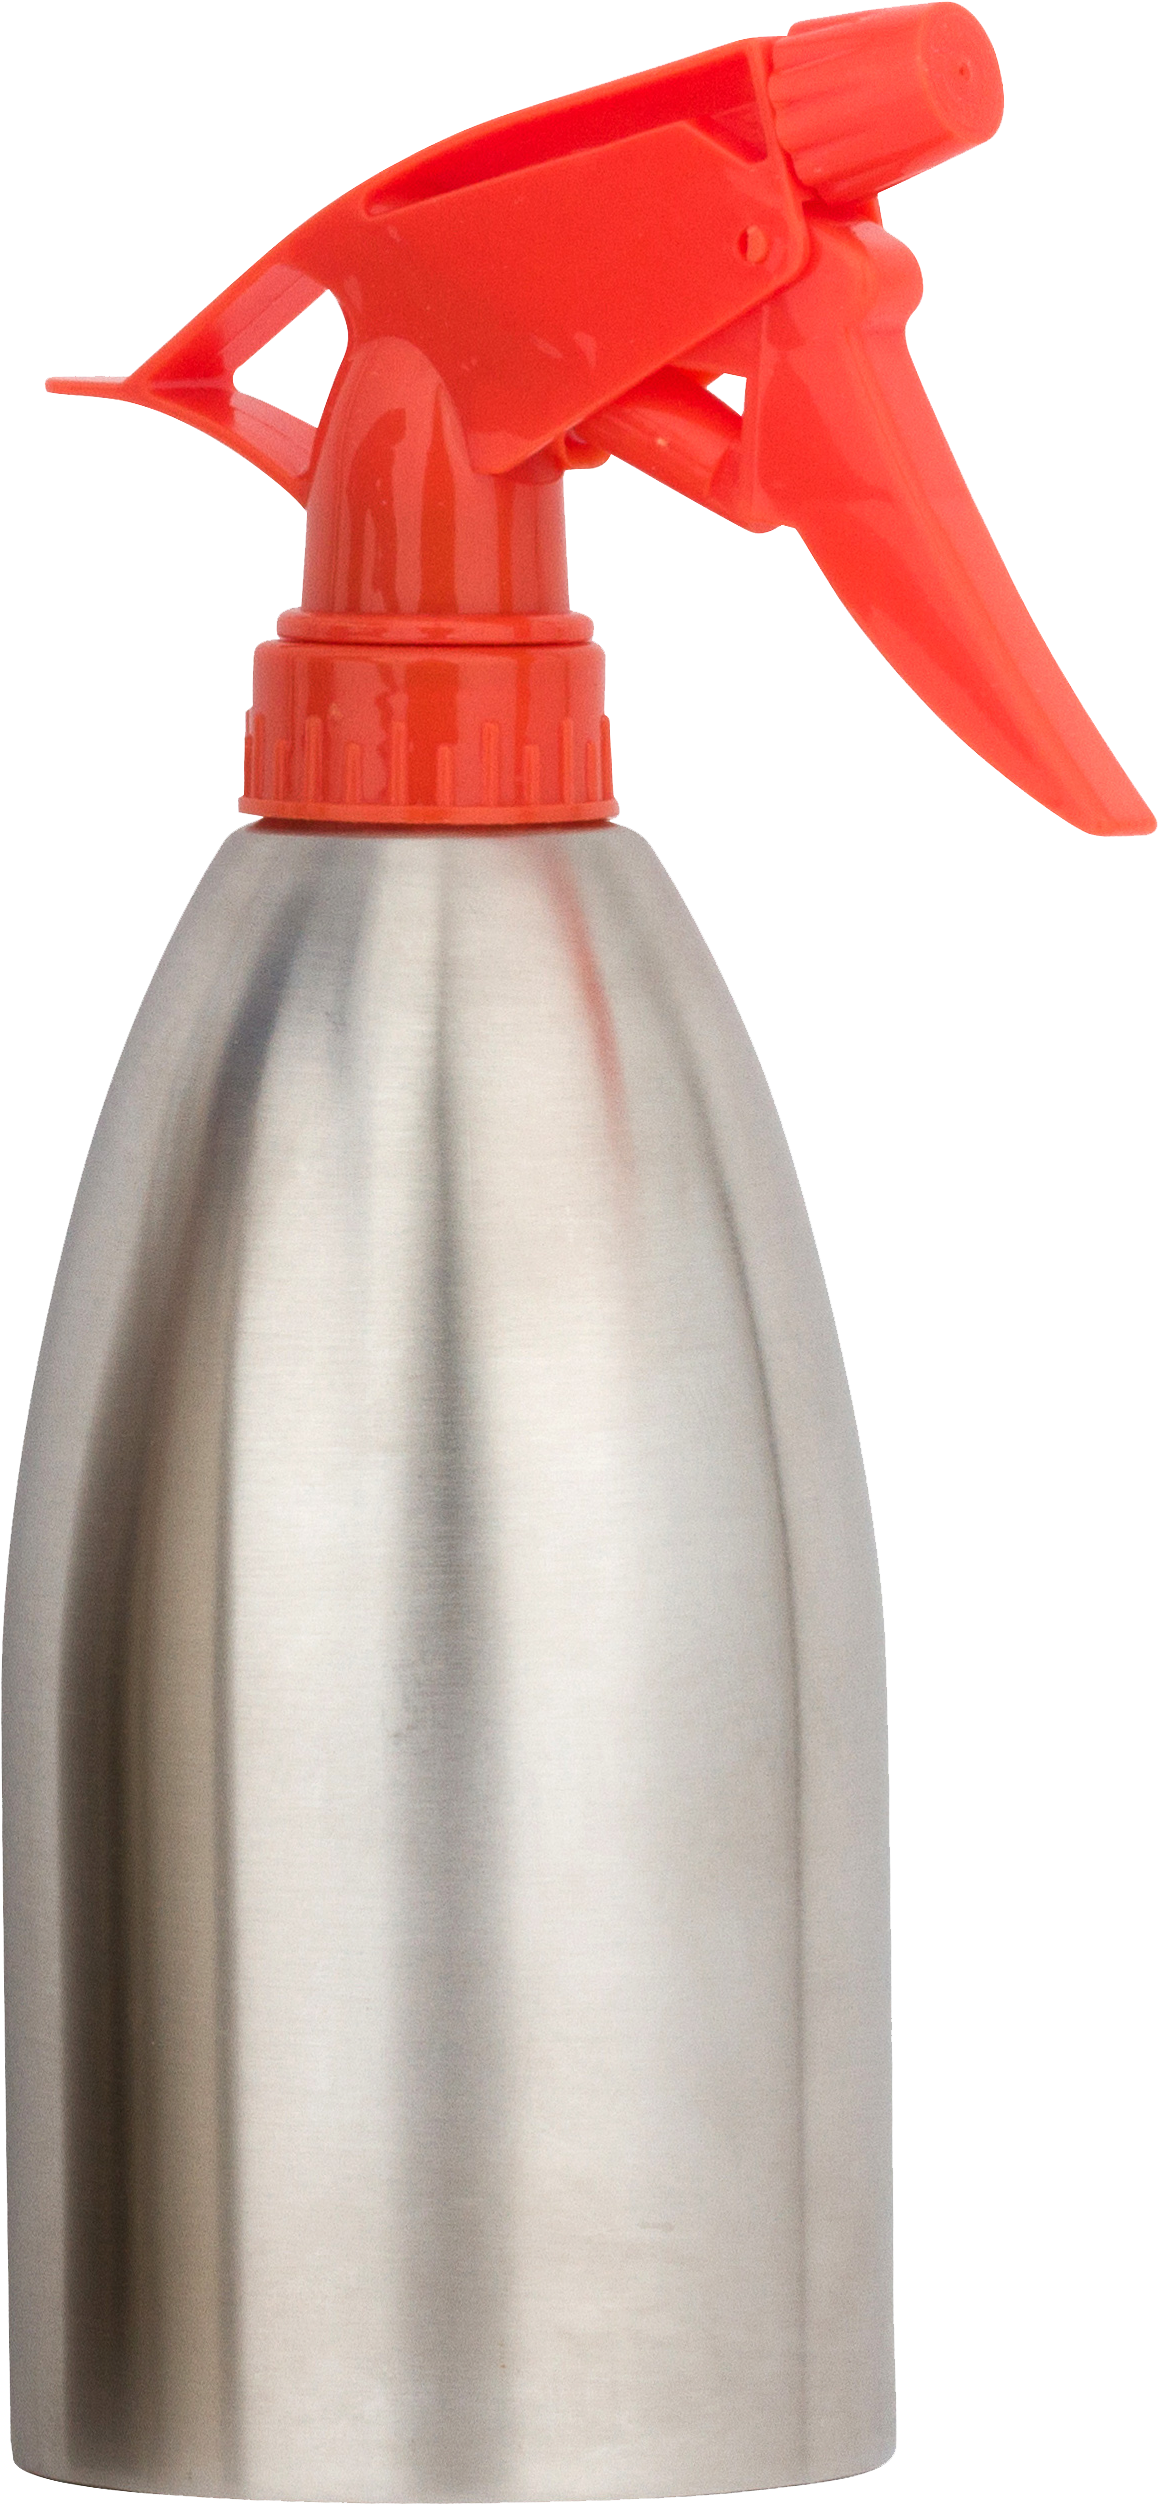 A Silver And Red Spray Bottle